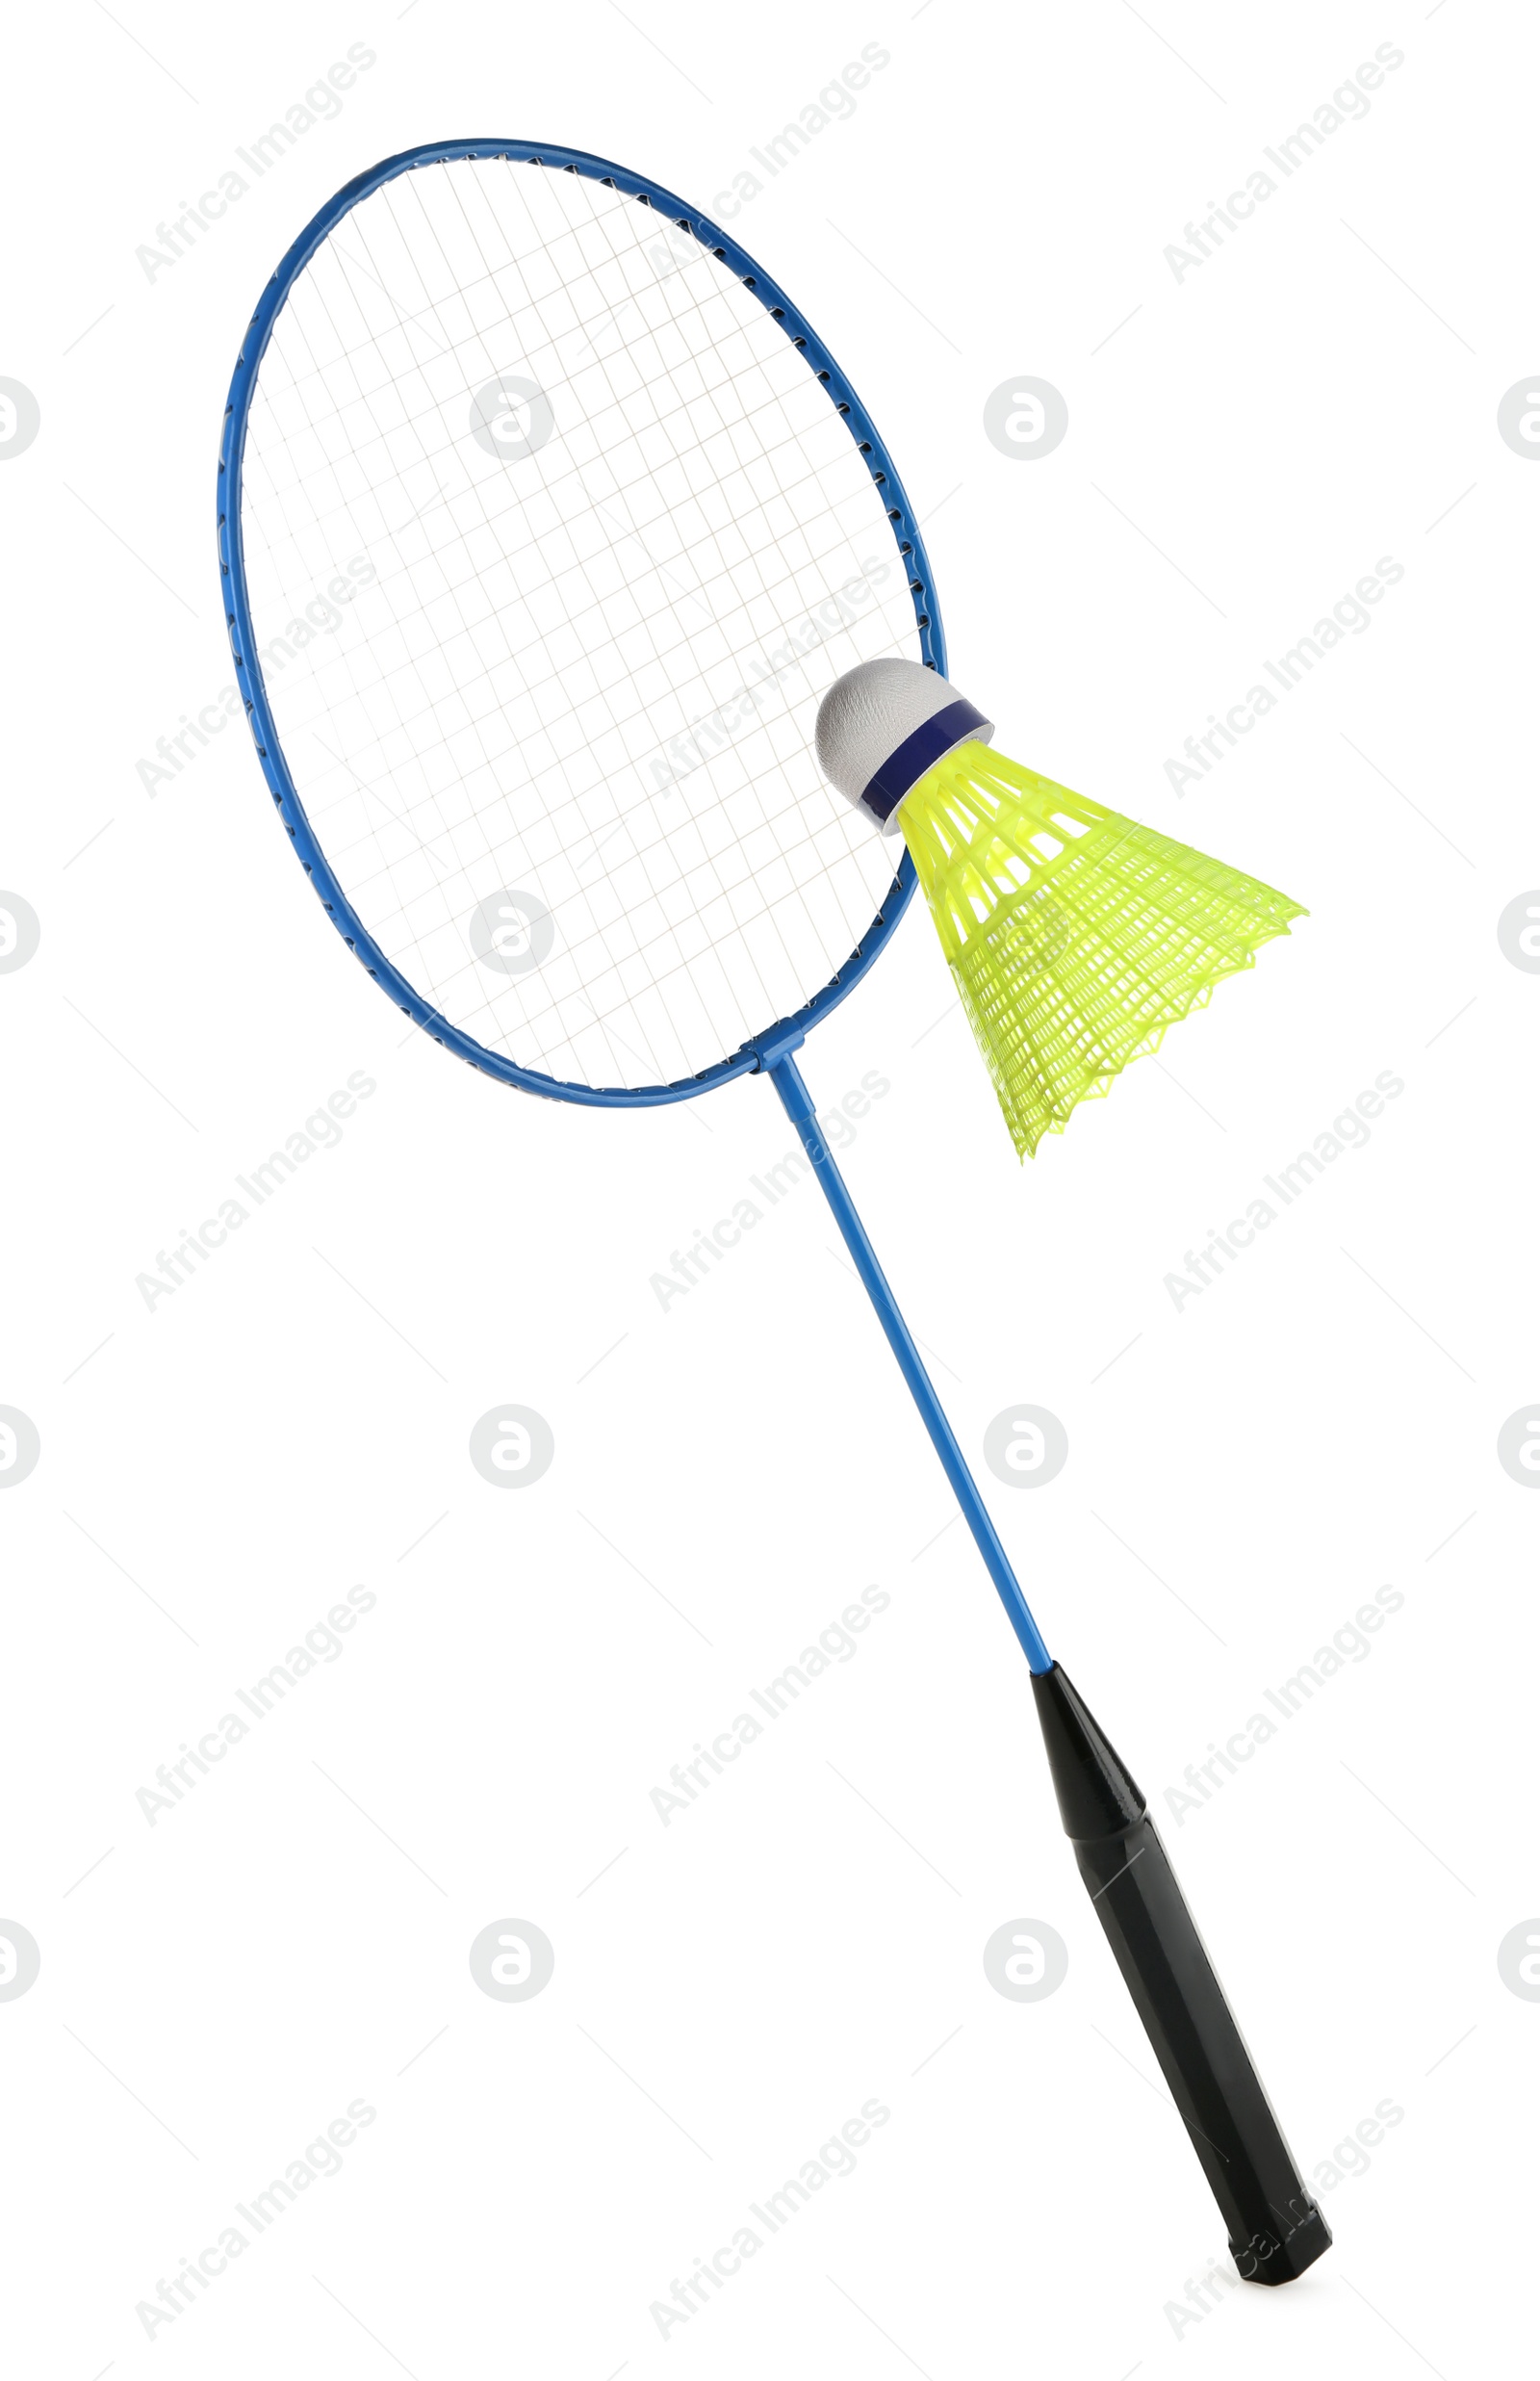 Image of Badminton racket and shuttlecock on white background. Sports equipment